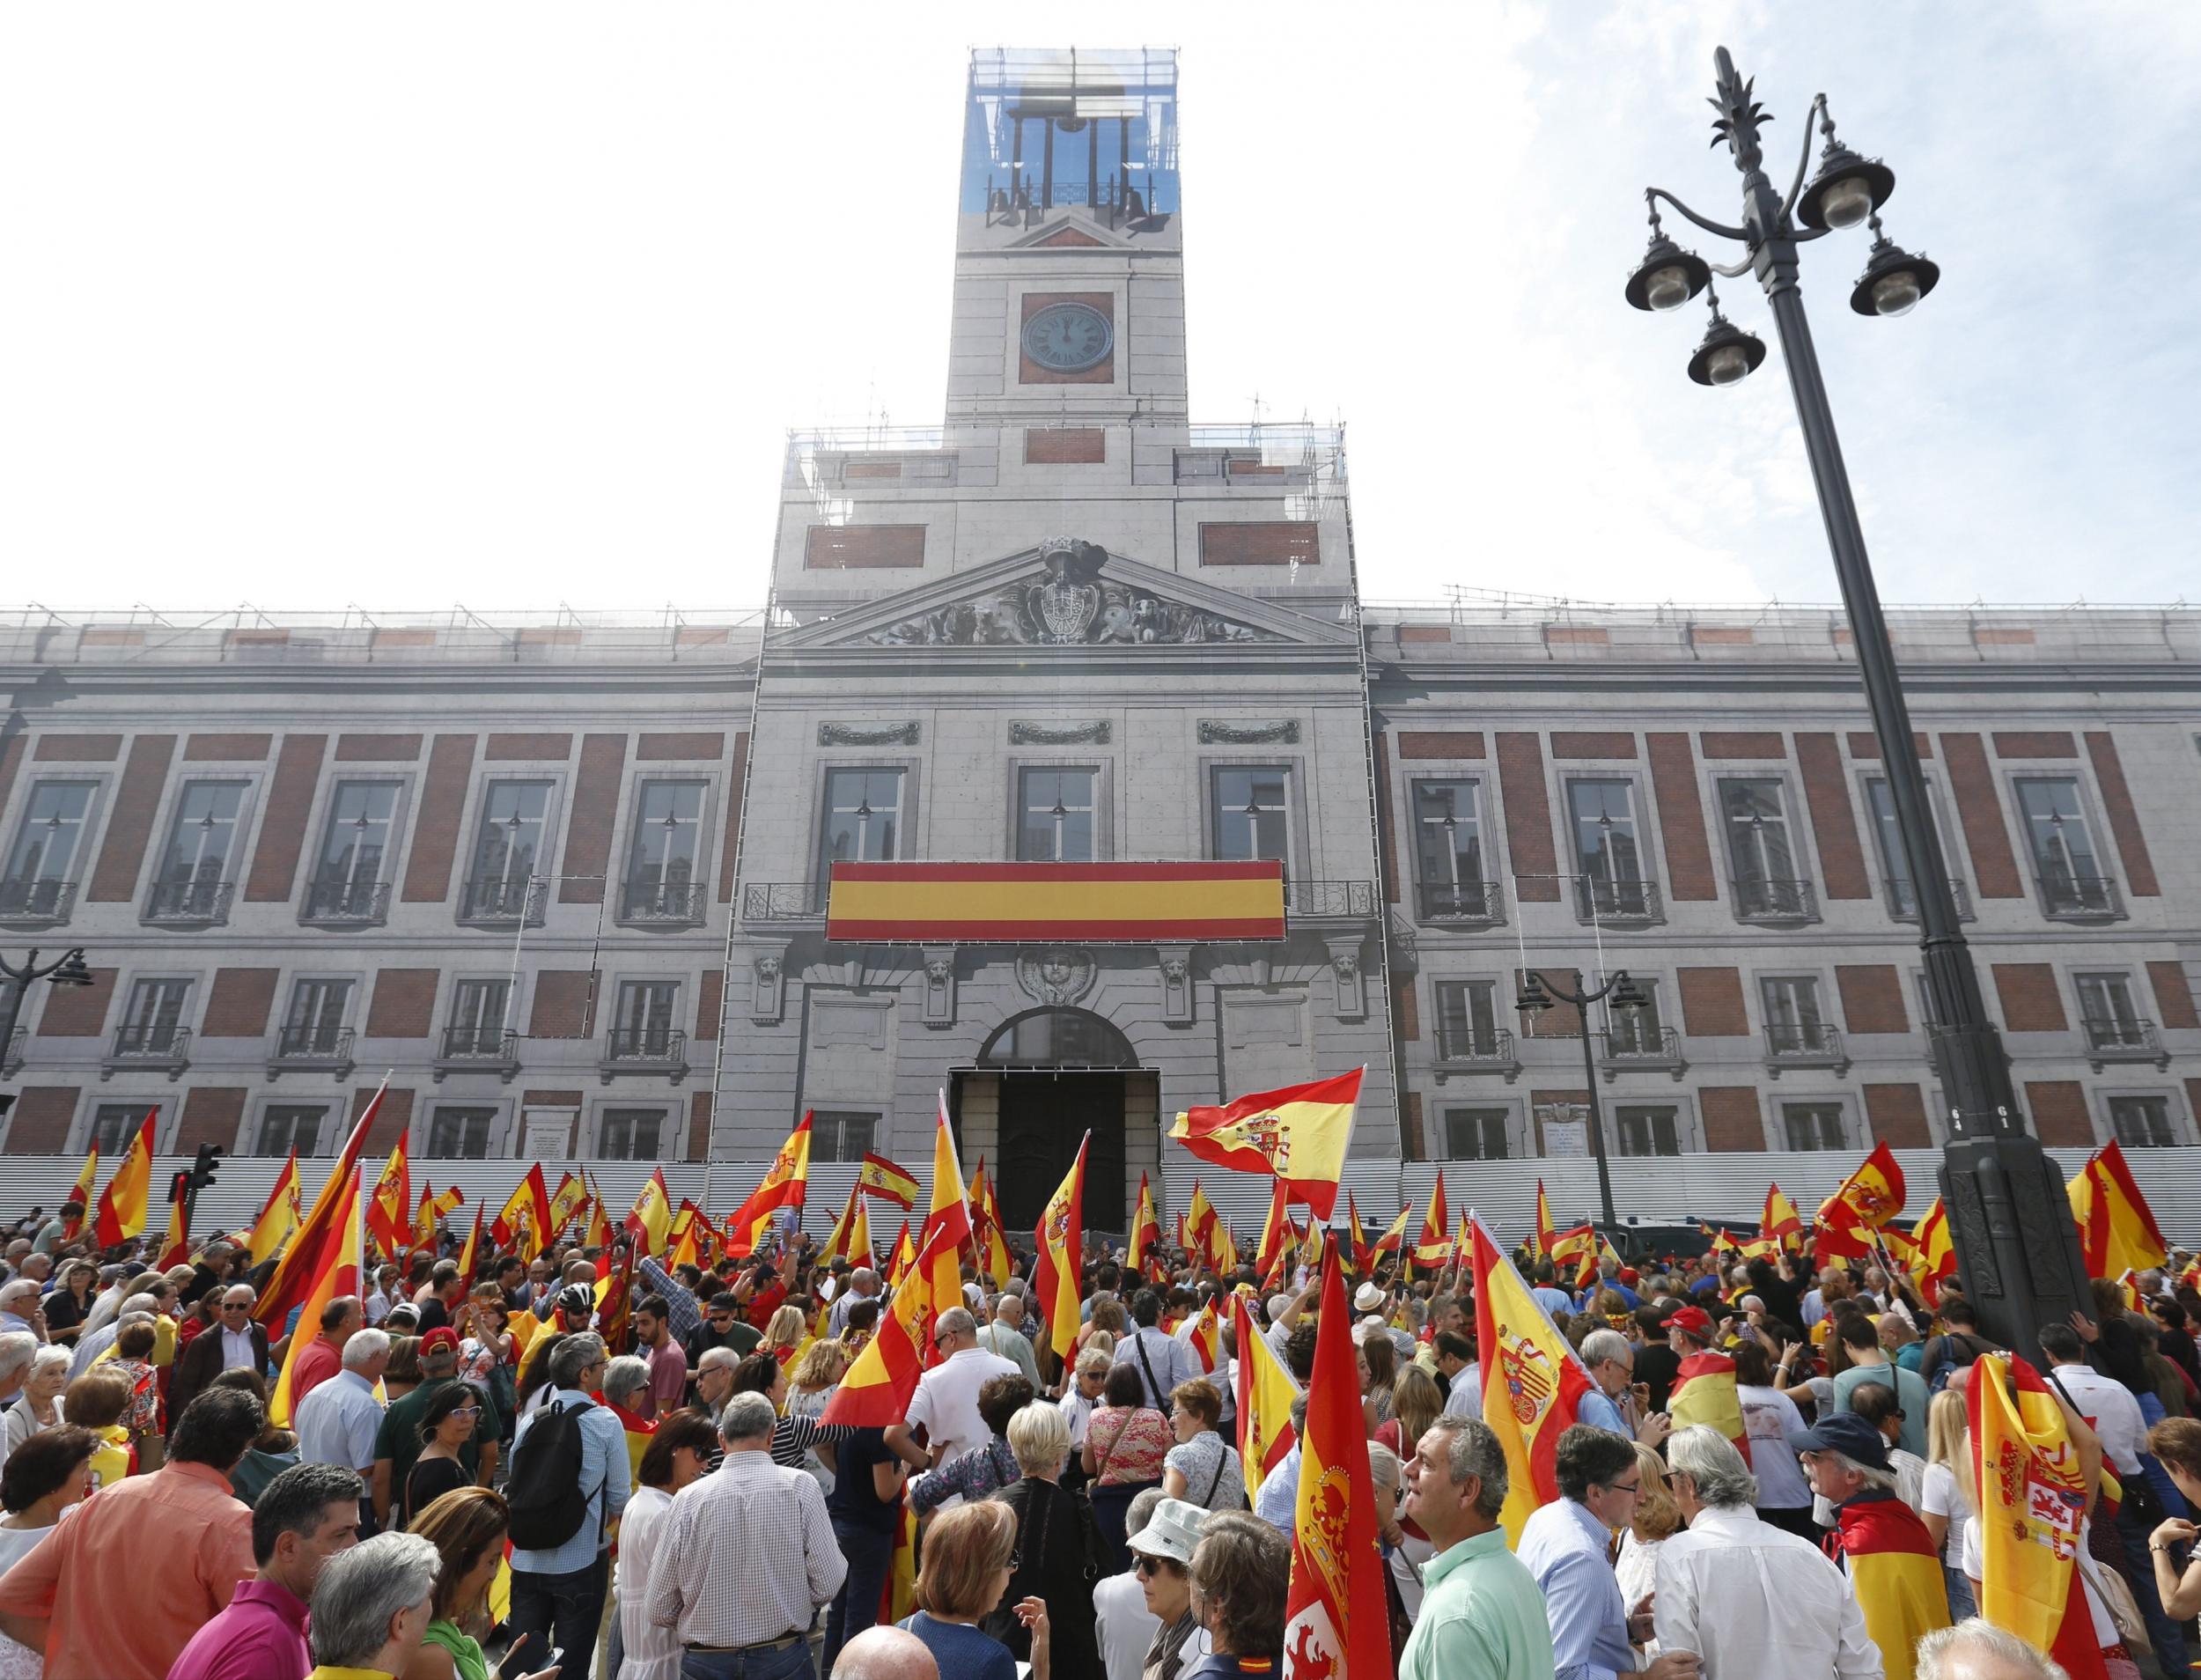 If Catalonia were to become an independent country, it would want to remain within the EU – but Spain would block it